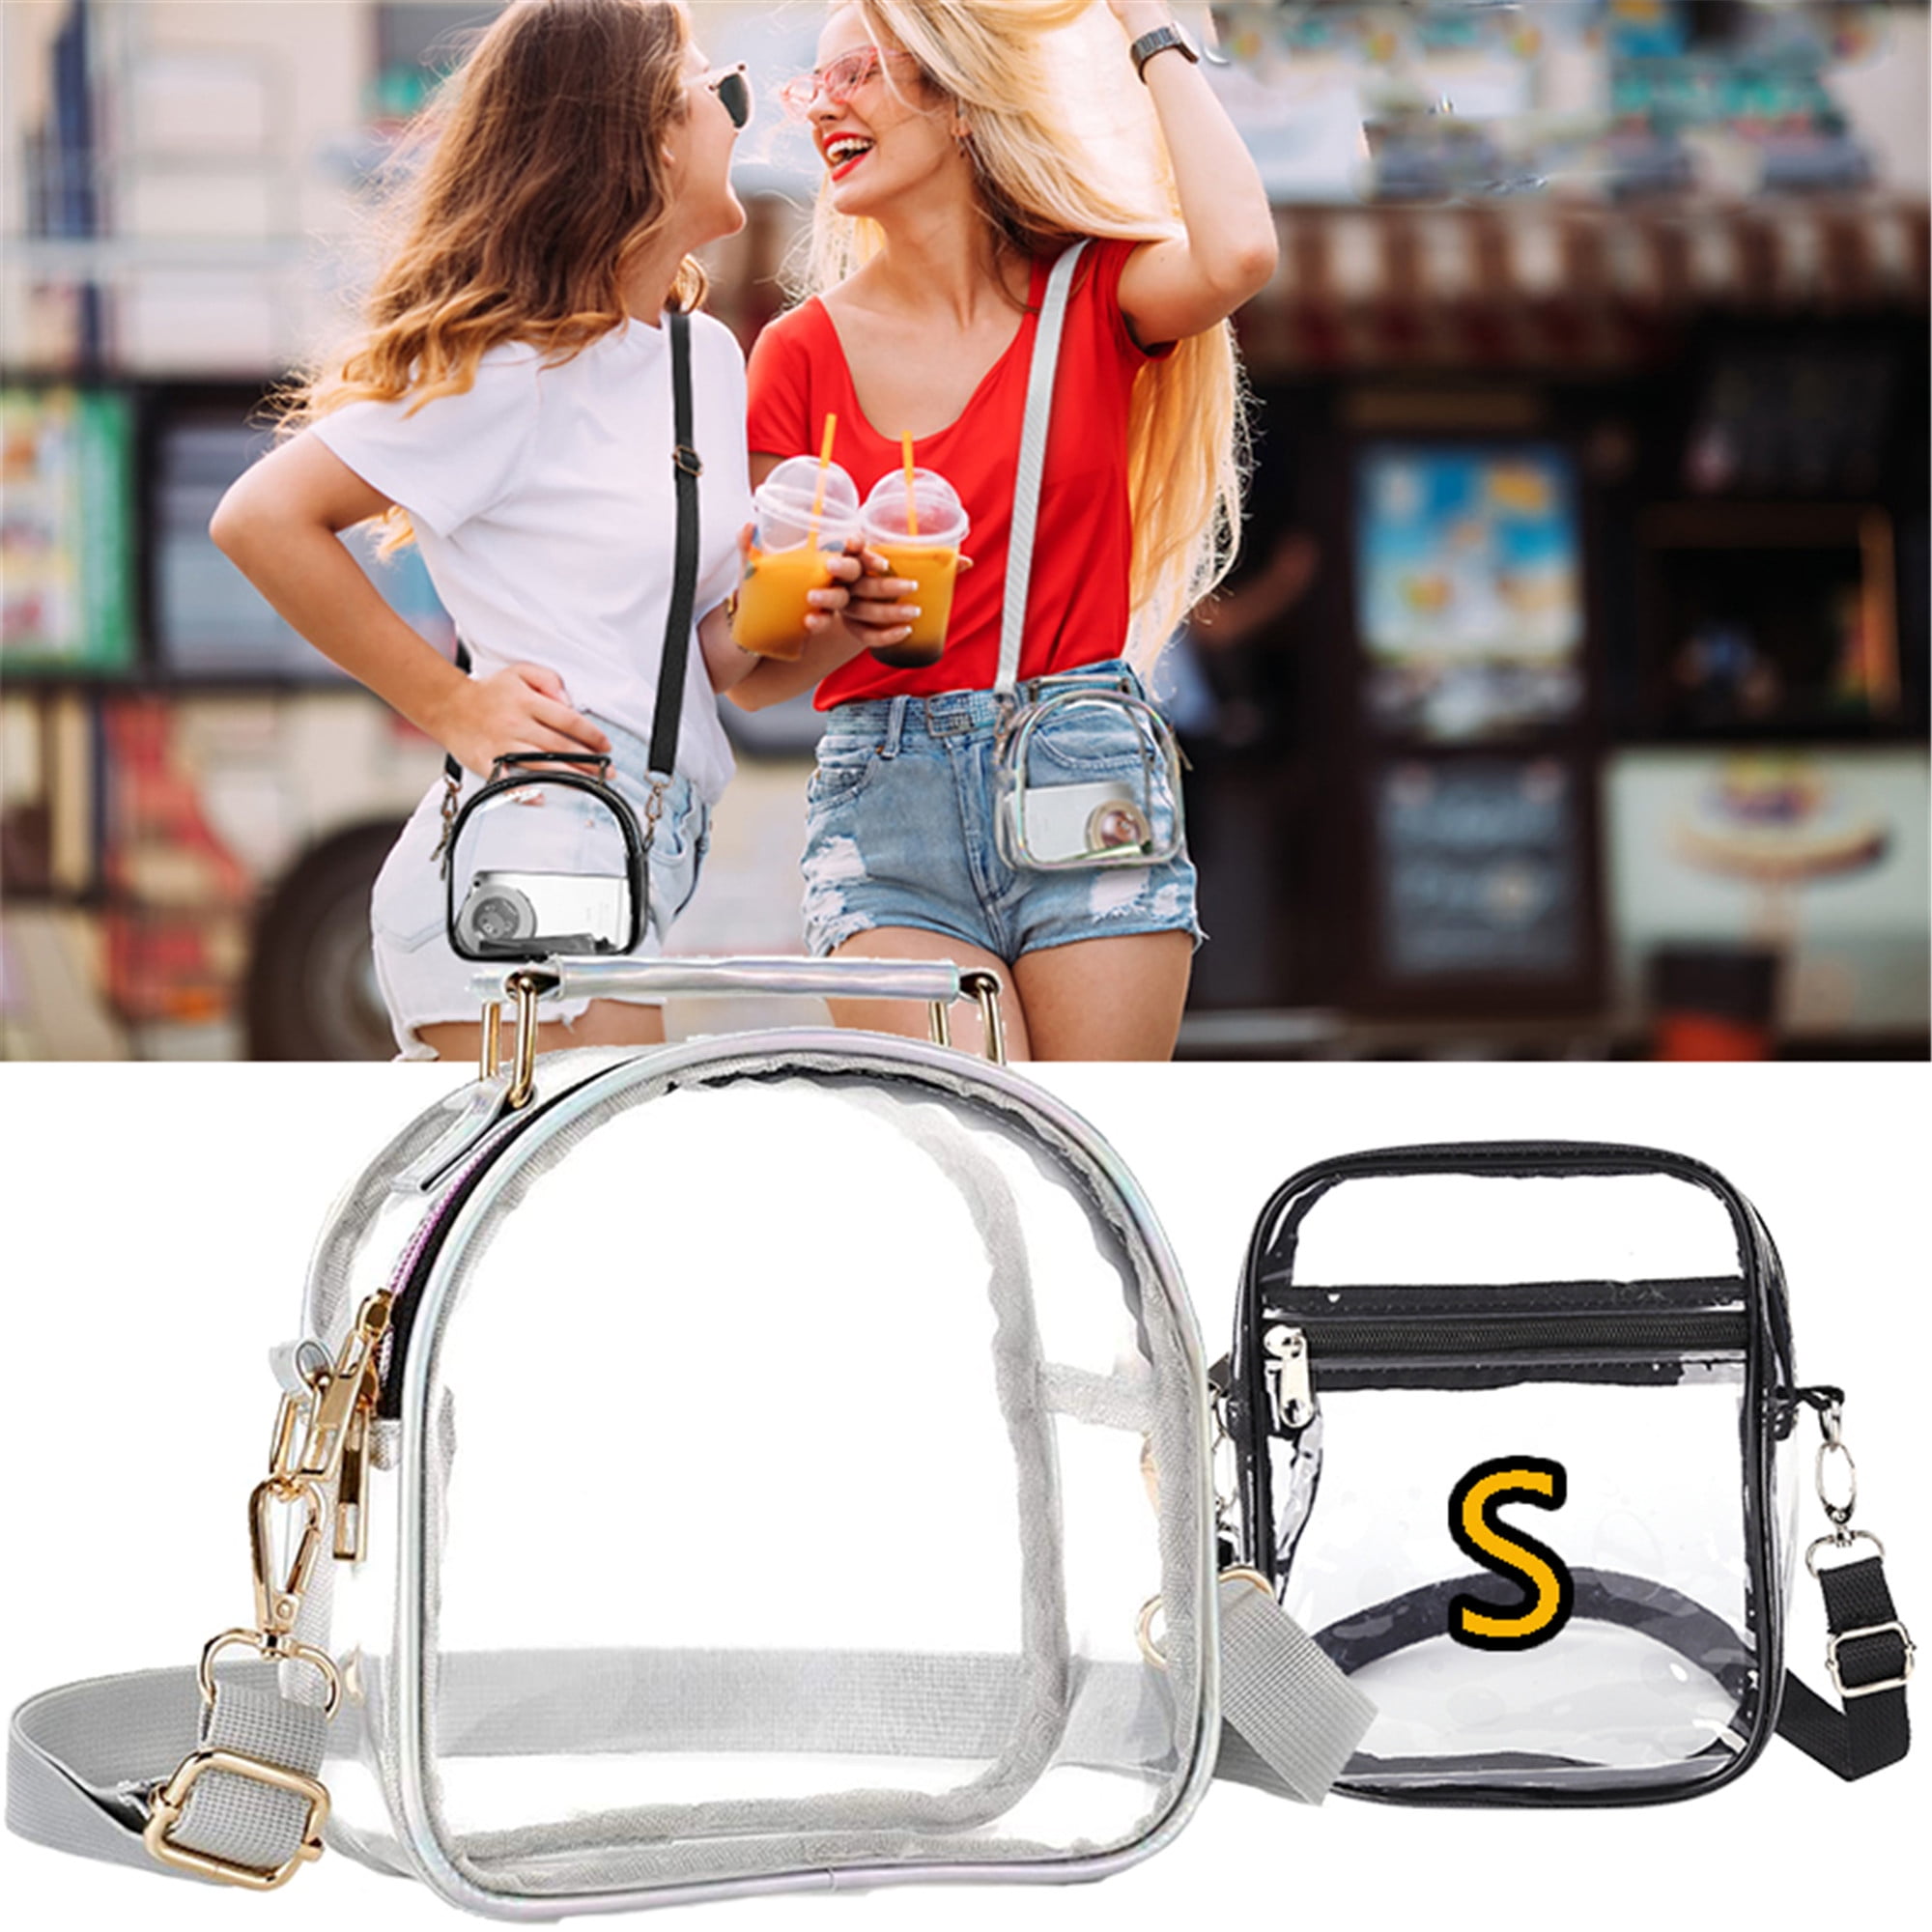 Stadium Approved Clear Bags for Women,Elbourn Clear Stadium Bags